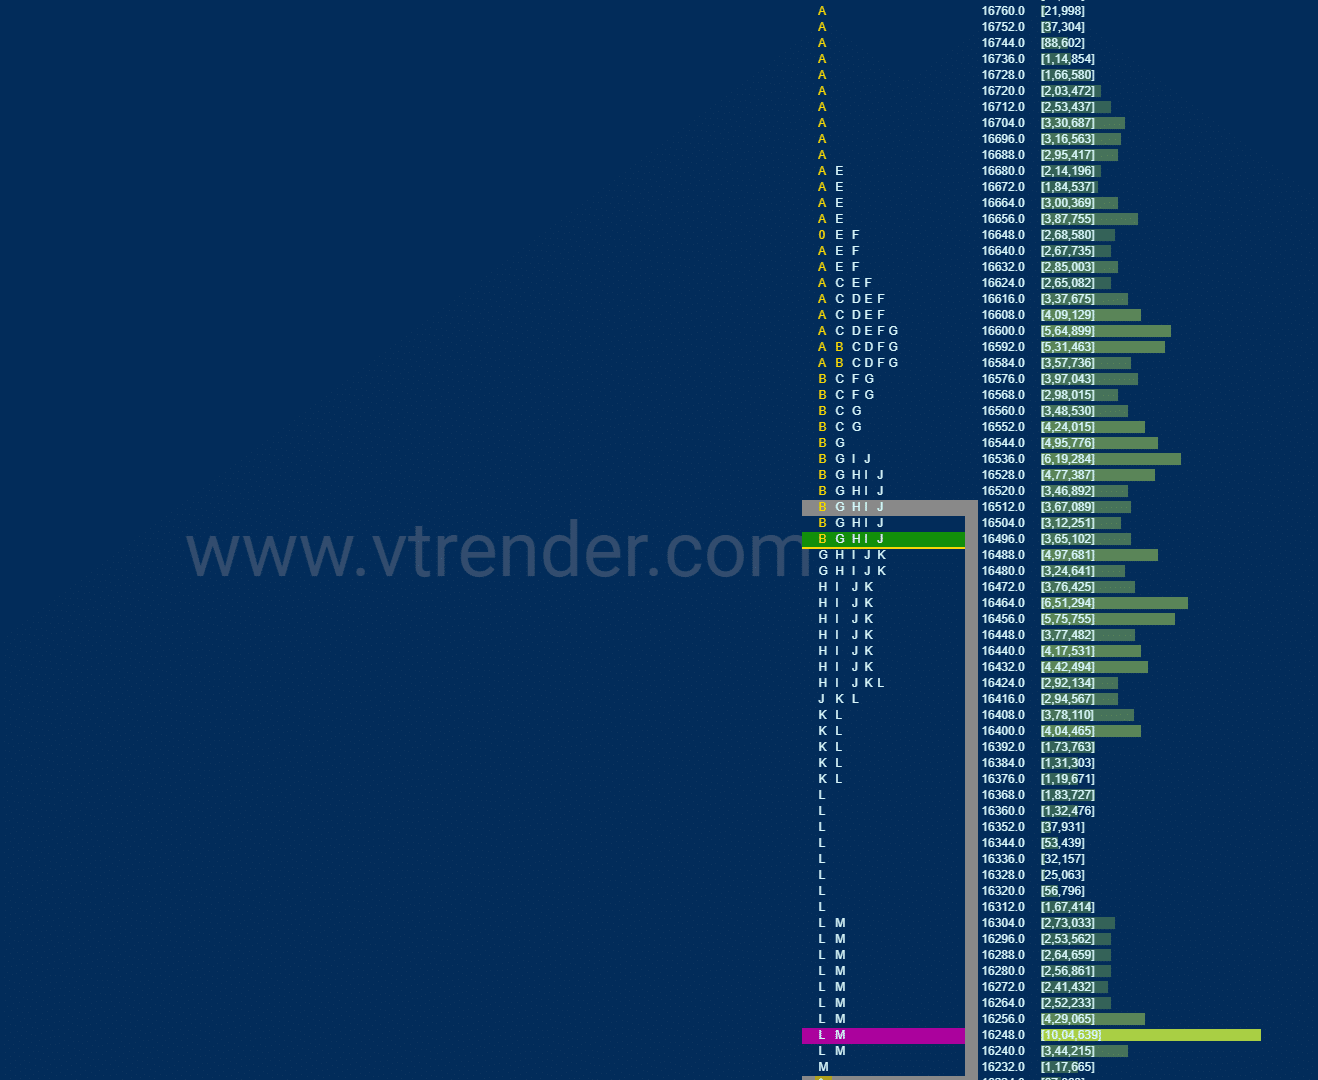 Nf 17 Market Profile Analysis Dated 24Th February 2022 Banknifty Futures, Charts, Day Trading, Intraday Trading, Intraday Trading Strategies, Market Profile, Market Profile Trading Strategies, Nifty Futures, Order Flow Analysis, Support And Resistance, Technical Analysis, Trading Strategies, Volume Profile Trading